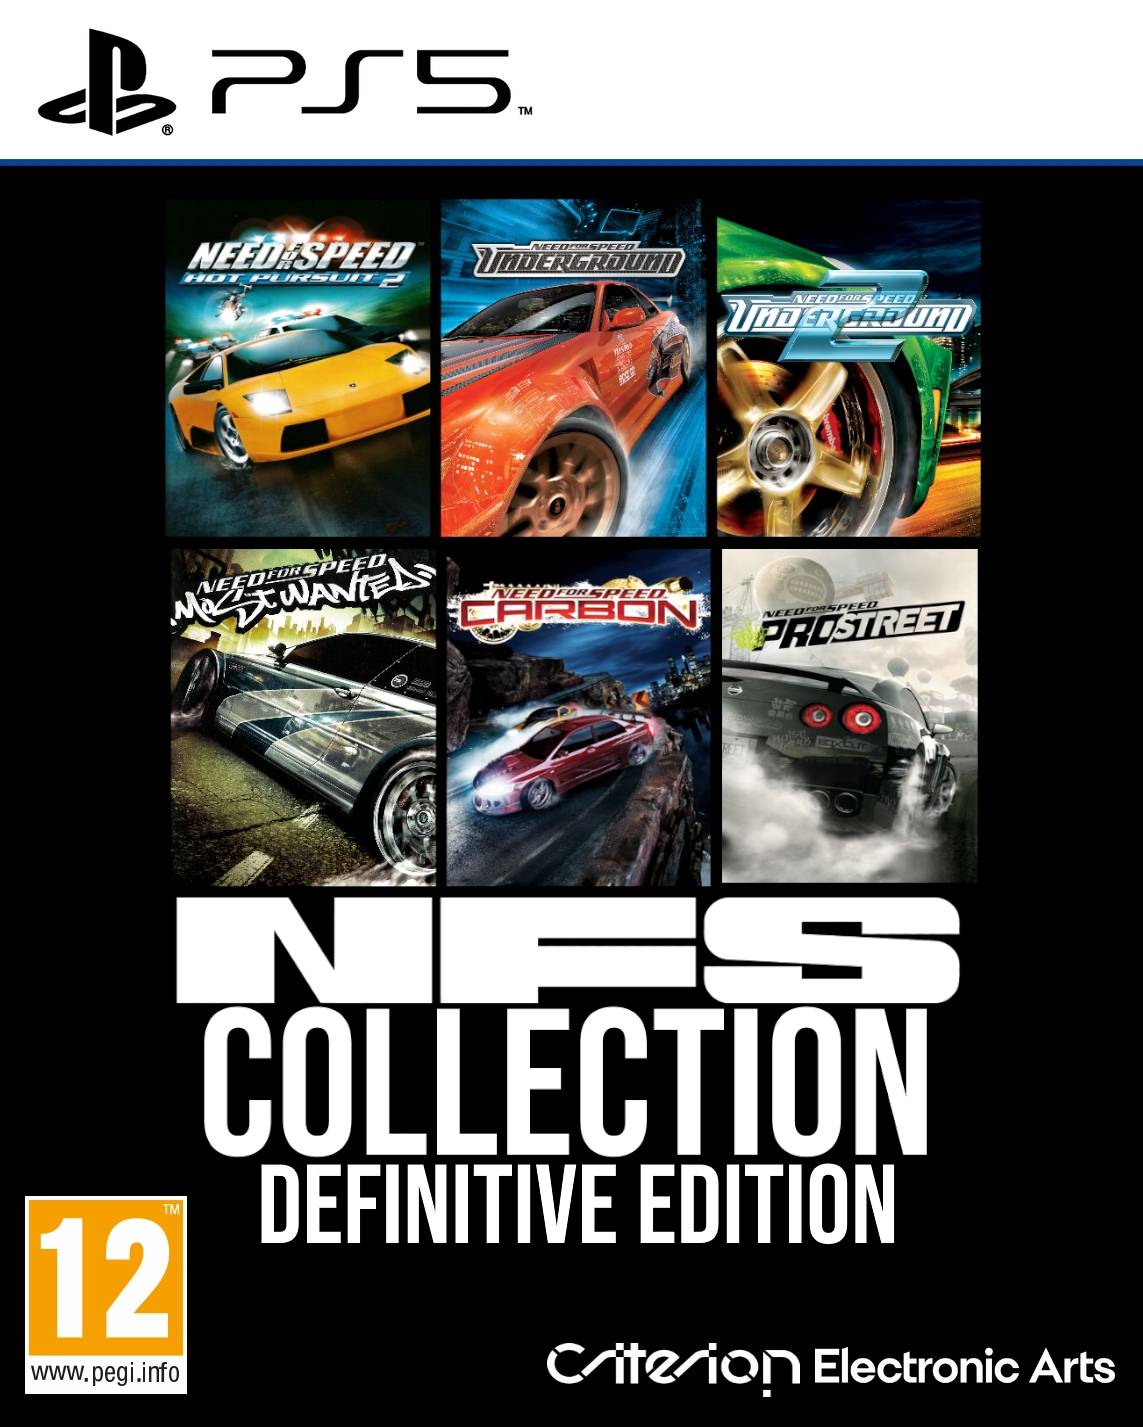 NFS Collection Definitive Edition on Ps5 by melvin764g on DeviantArt